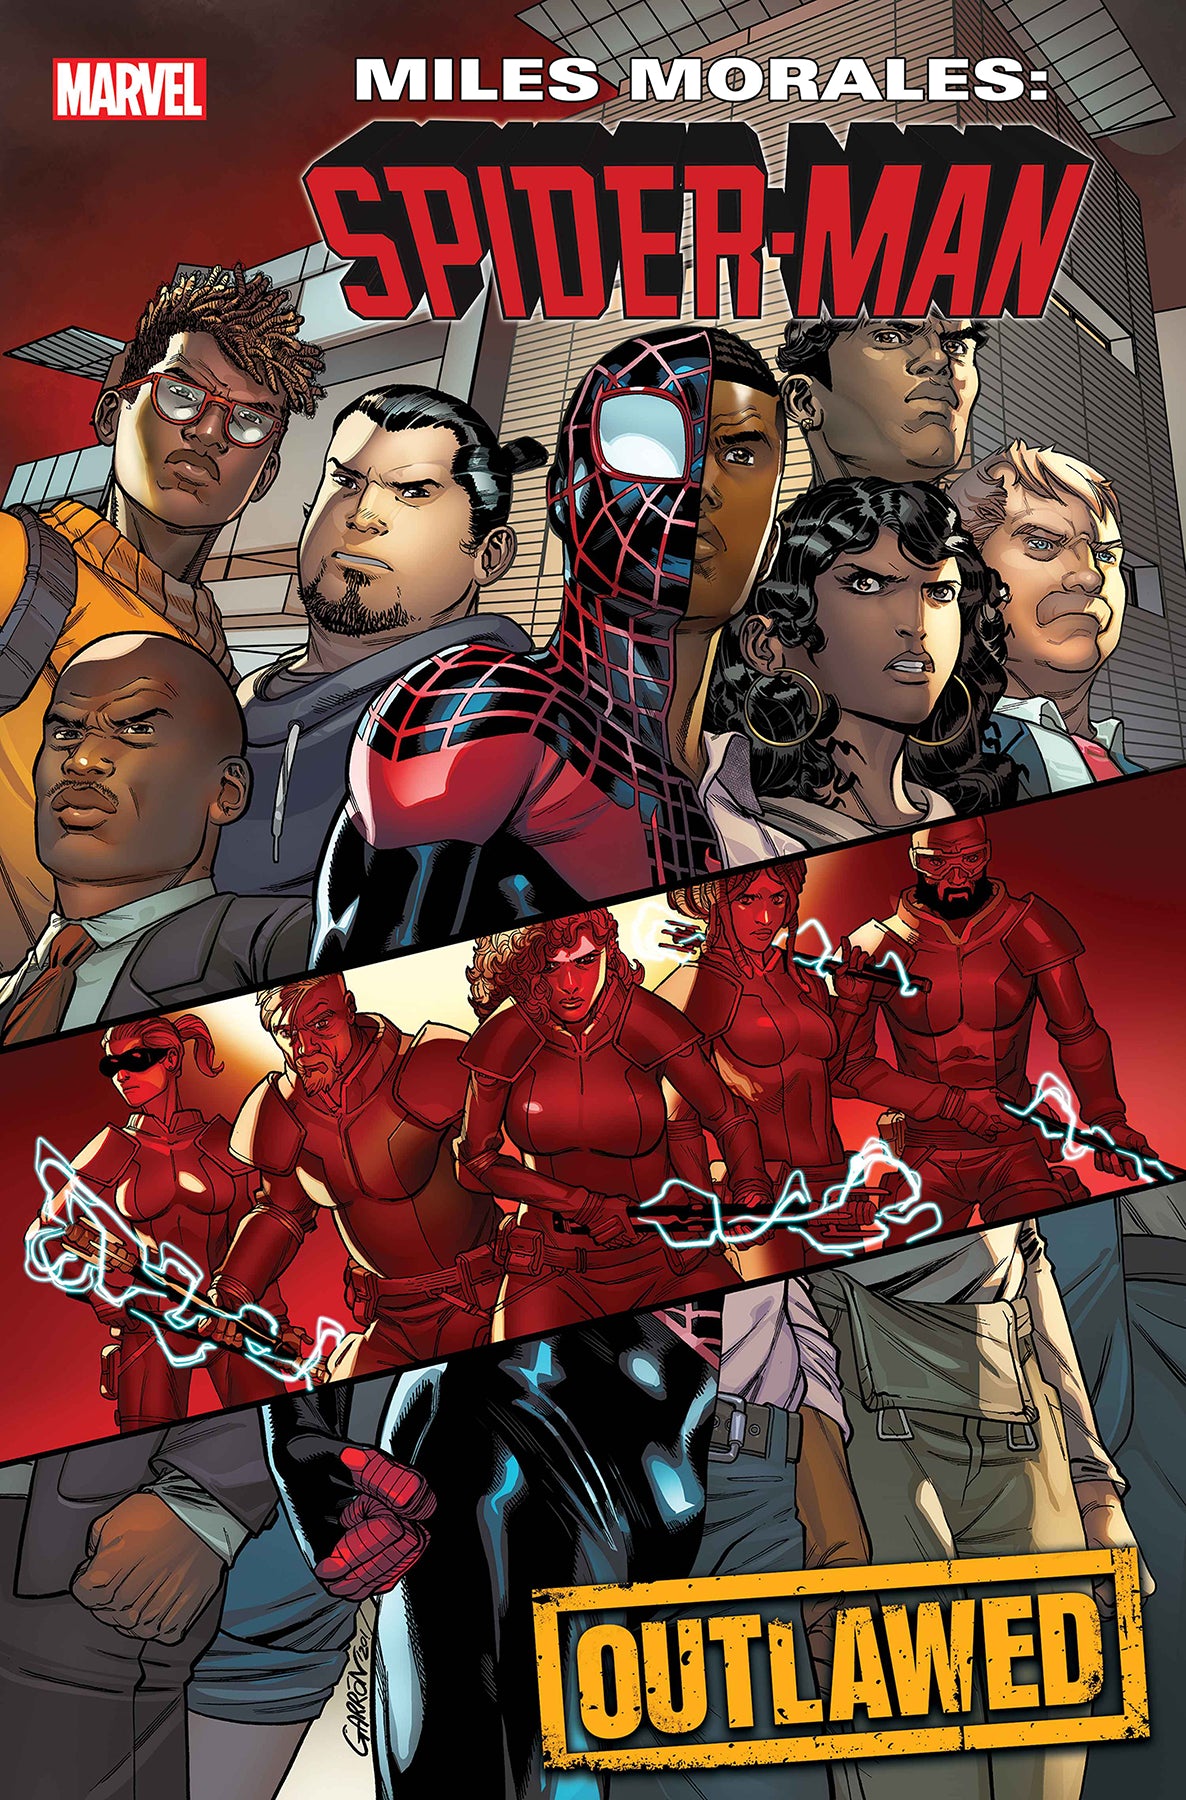 Miles Morales Spider-Man #18 Out - State of Comics